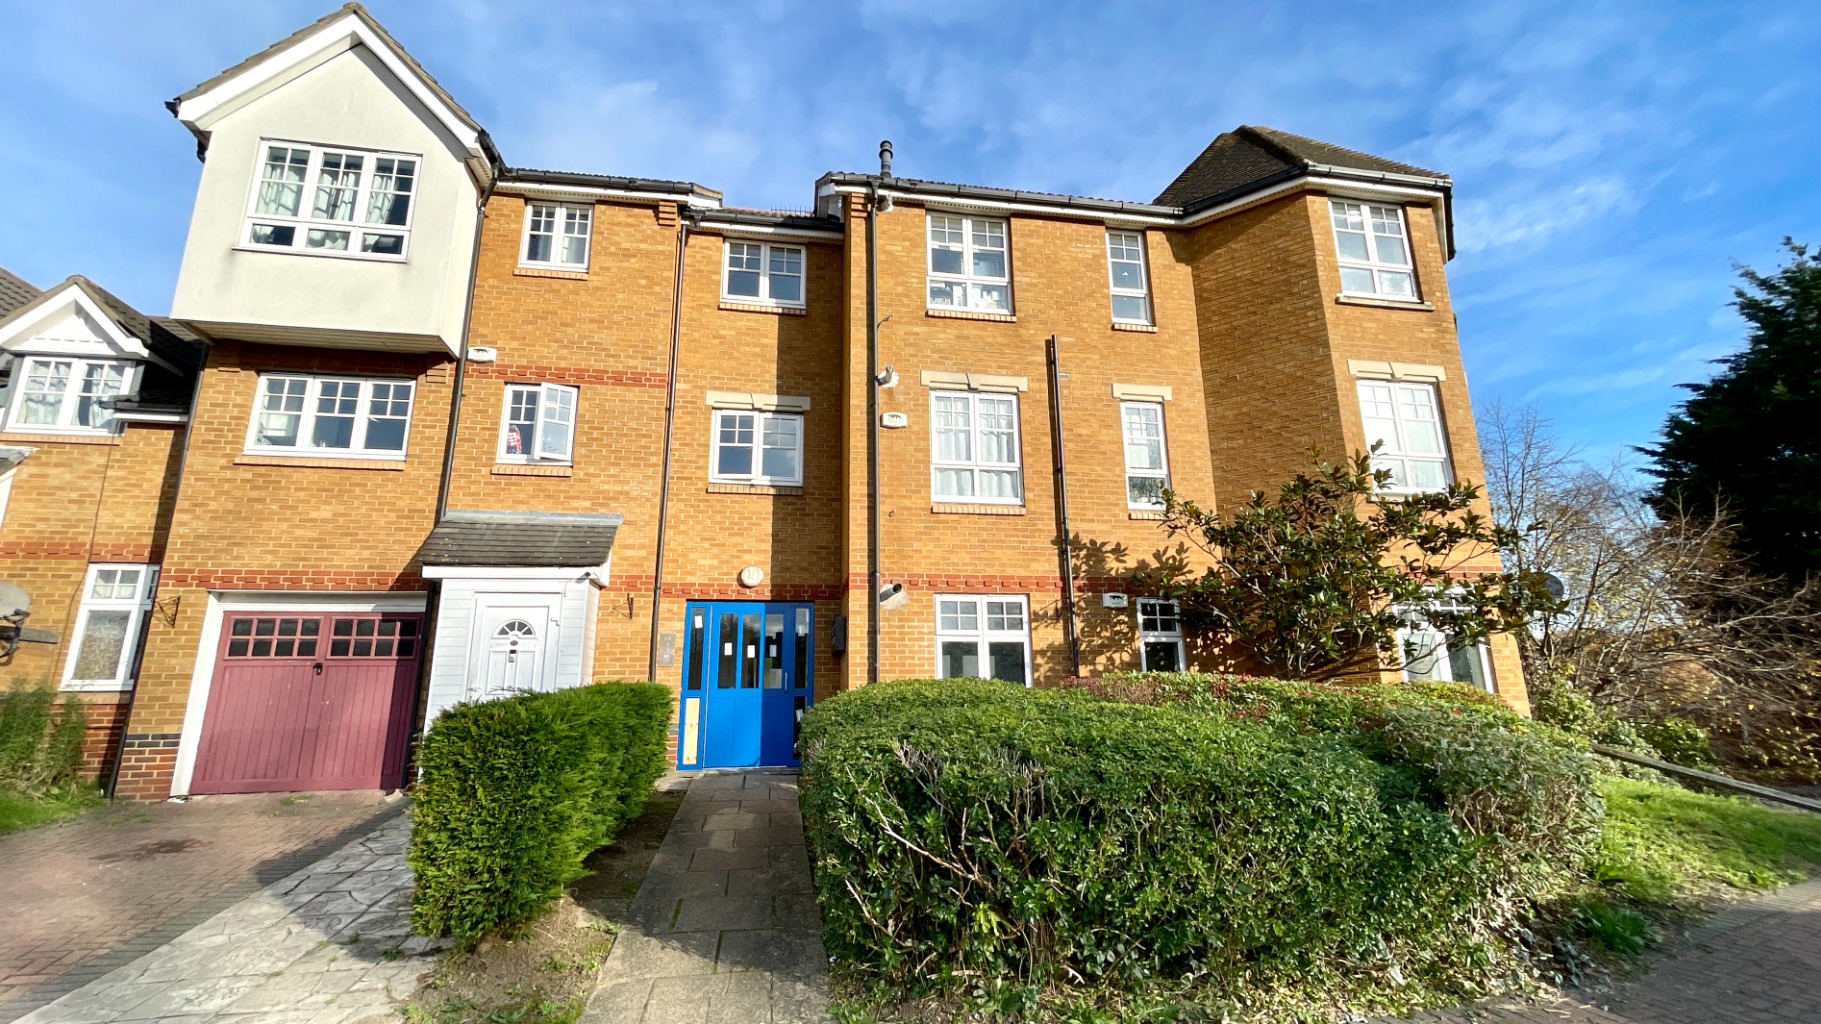 Beaumont Gibbs are pleased to offer for sale this two bedroom first floor flat. The property has many benefits, which include allocated parking, access to a private communal garden, lift service, gas central heating and double glazing.